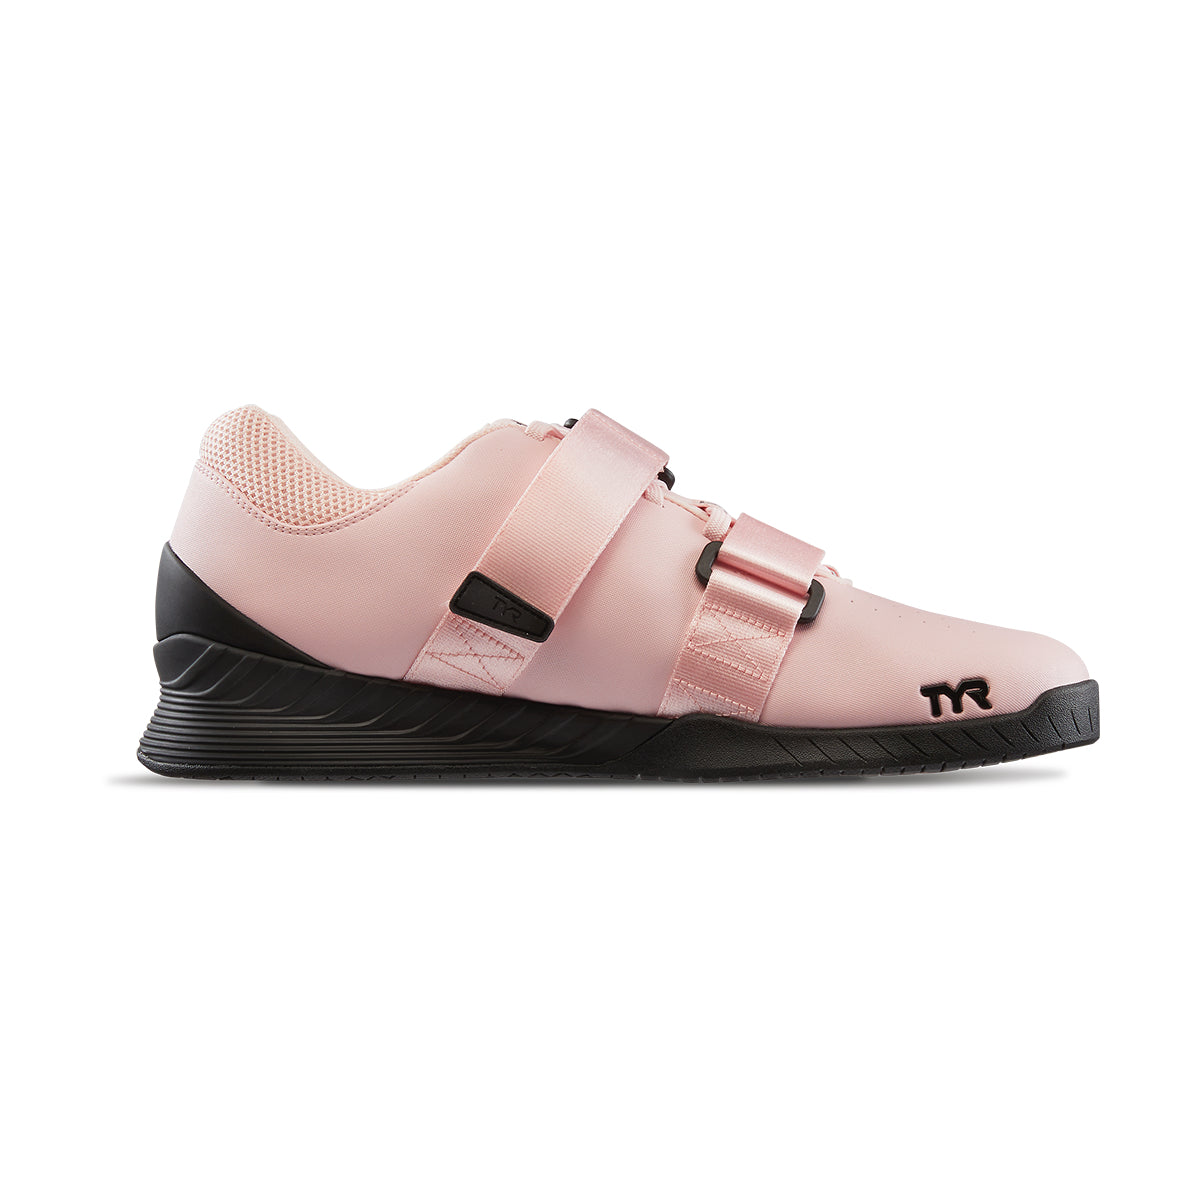 TYR L-1 Lifter Shoes (694 Pink/Black)